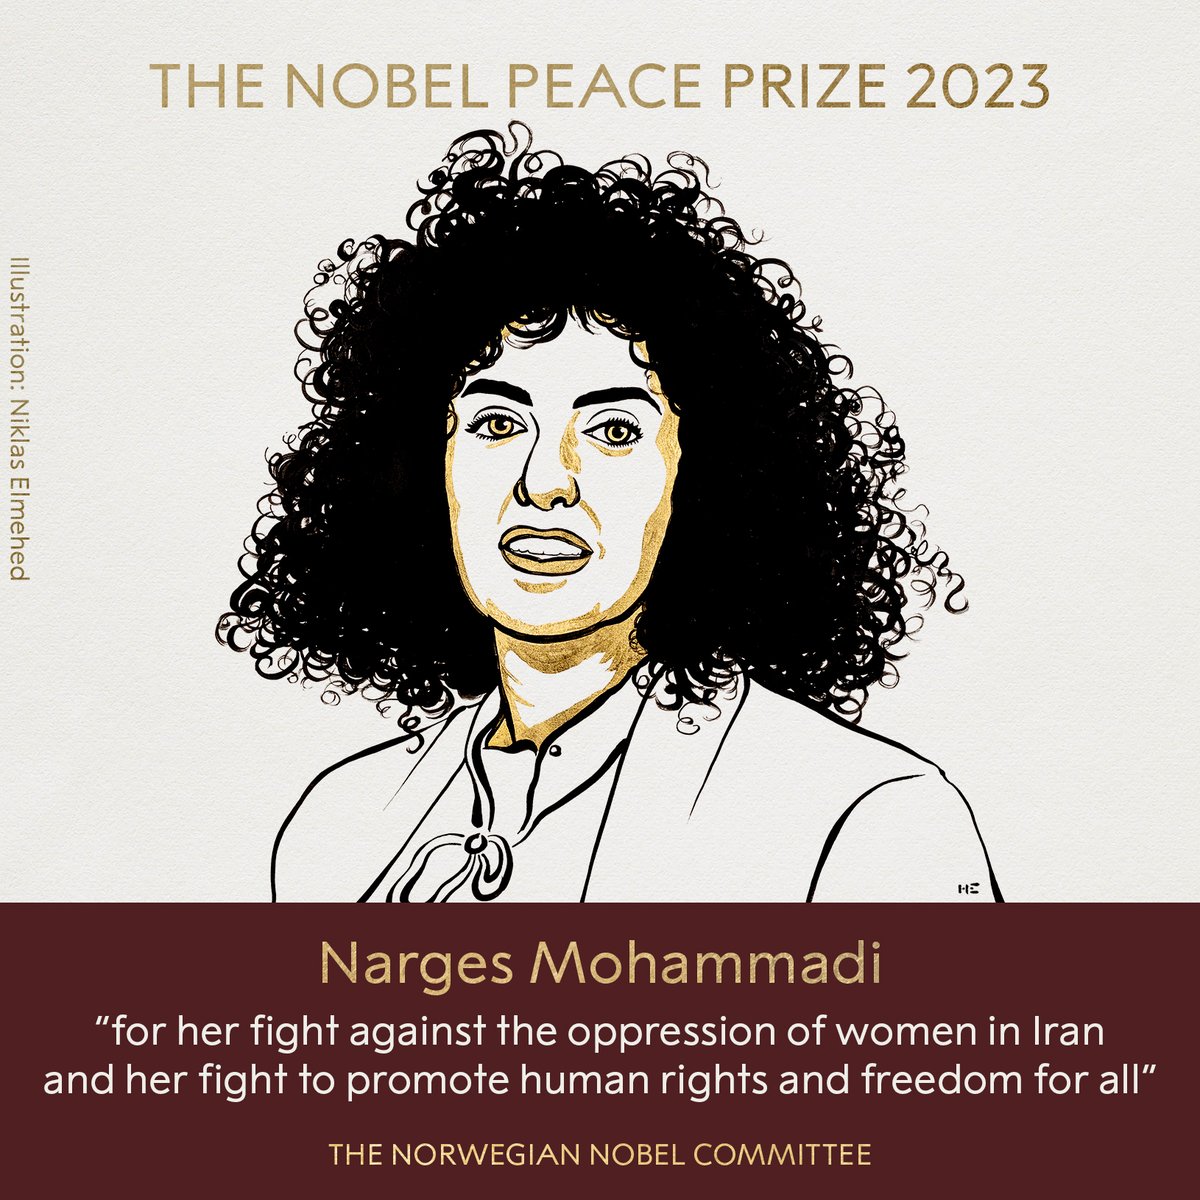 BREAKING NEWS The Norwegian Nobel Committee has decided to award the 2023 #NobelPeacePrize to Narges Mohammadi for her fight against the oppression of women in Iran and her fight to promote human rights and freedom for all. #NobelPrize